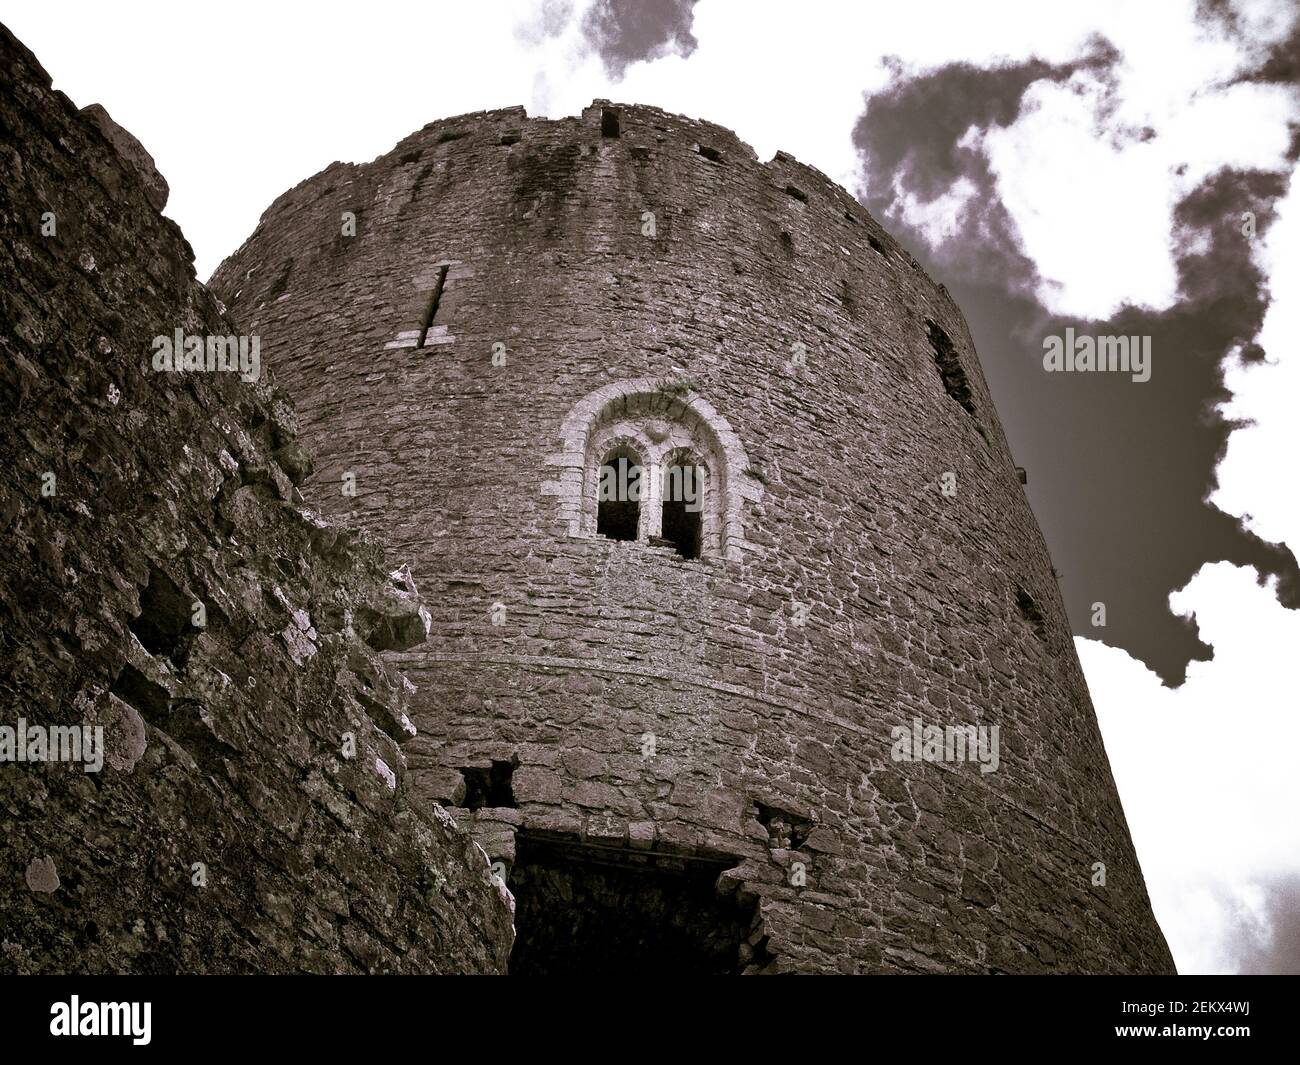 old, castle ruins, dilapidated castle, ancient, stone, medieval, fantasy, lore, king arthur, knights of the round table, grand castle, welsh castles Stock Photo